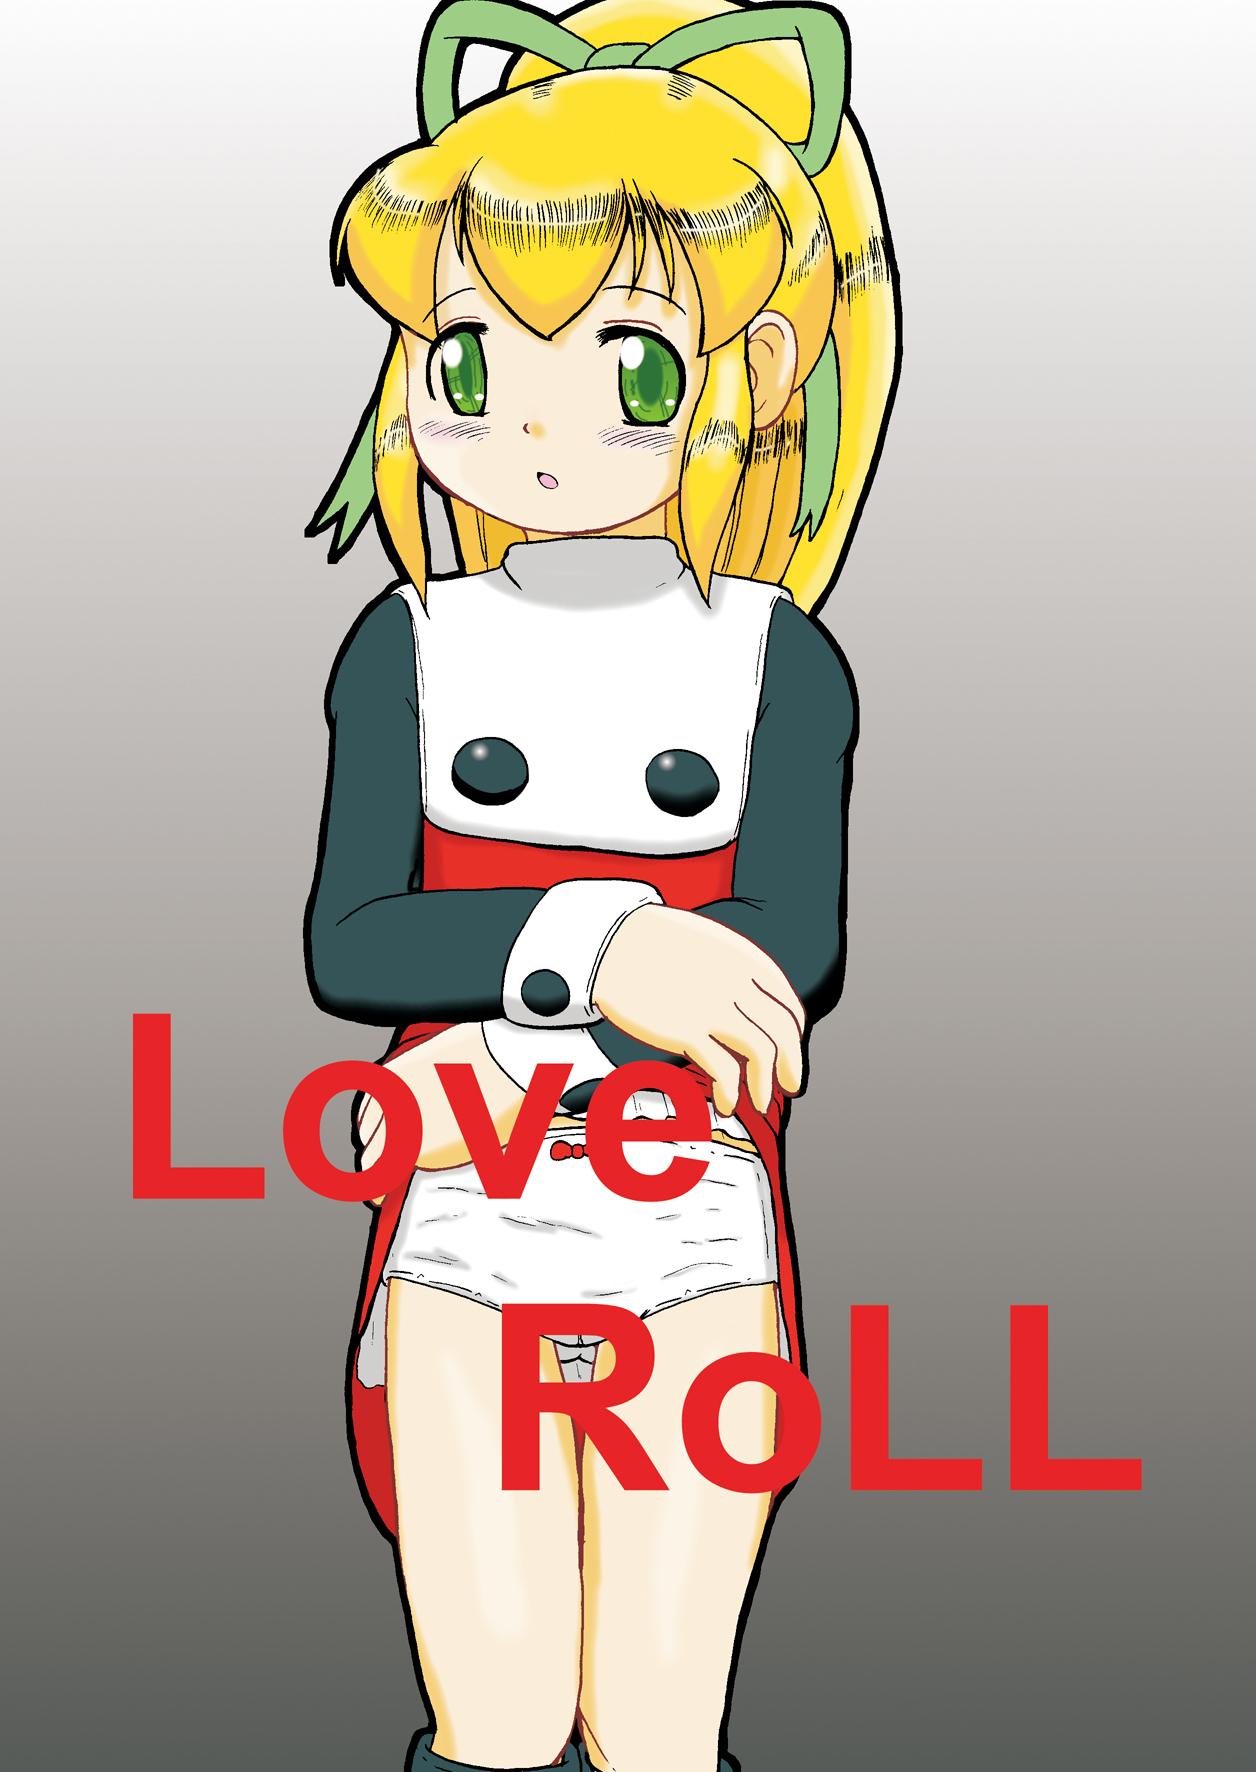 Hardcoresex LoveRoLL+DDD - Megaman Cyberbots Solo Girl - Picture 1